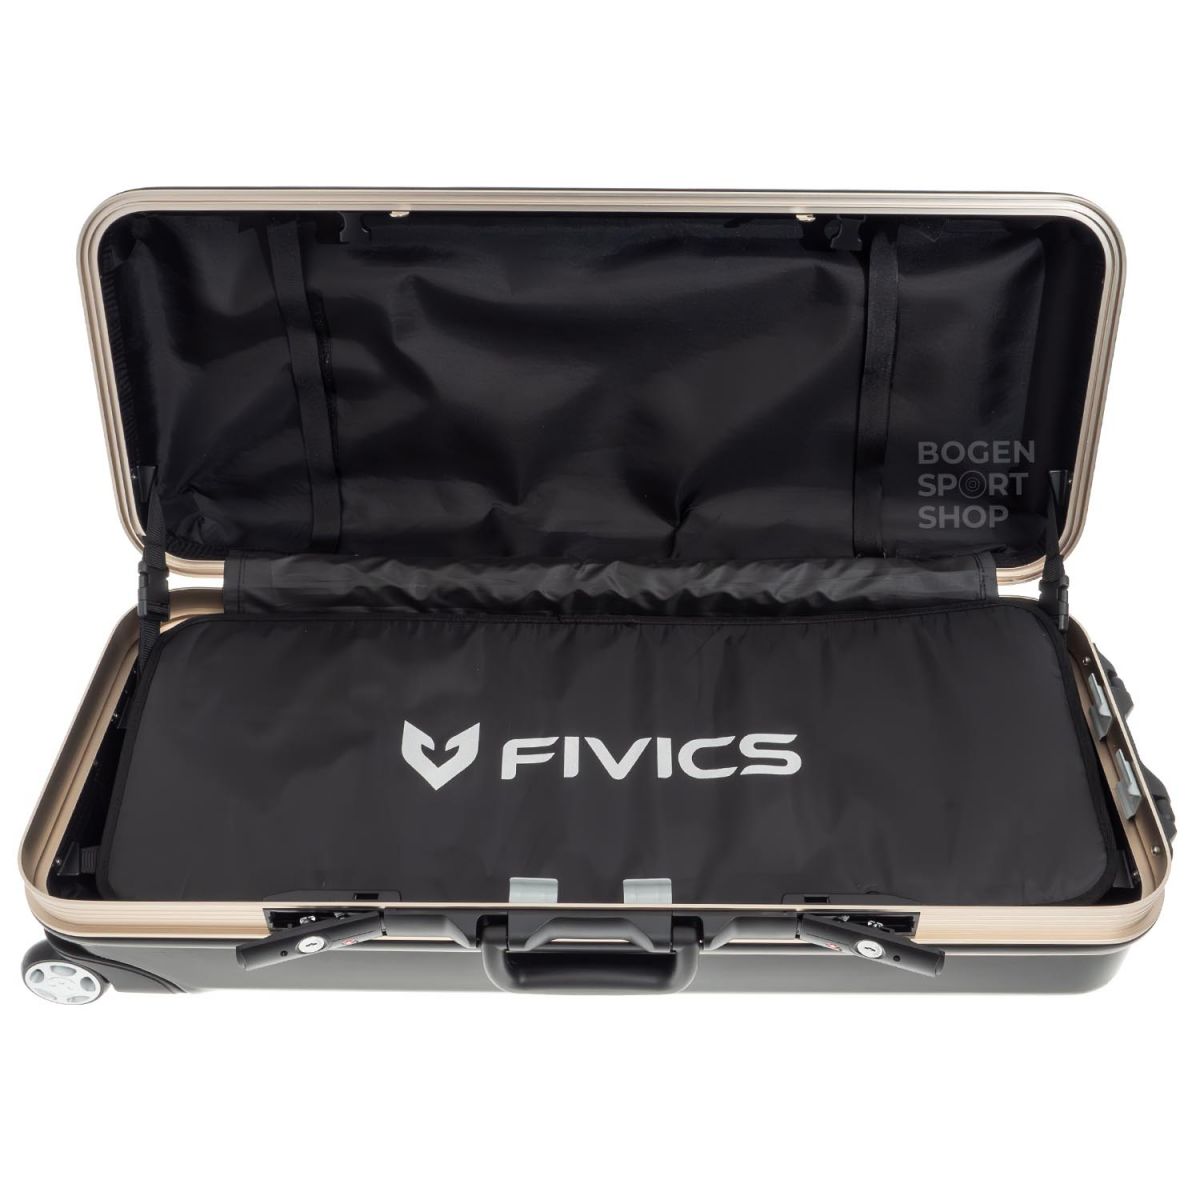 Fivics Aegis Case for One Bow